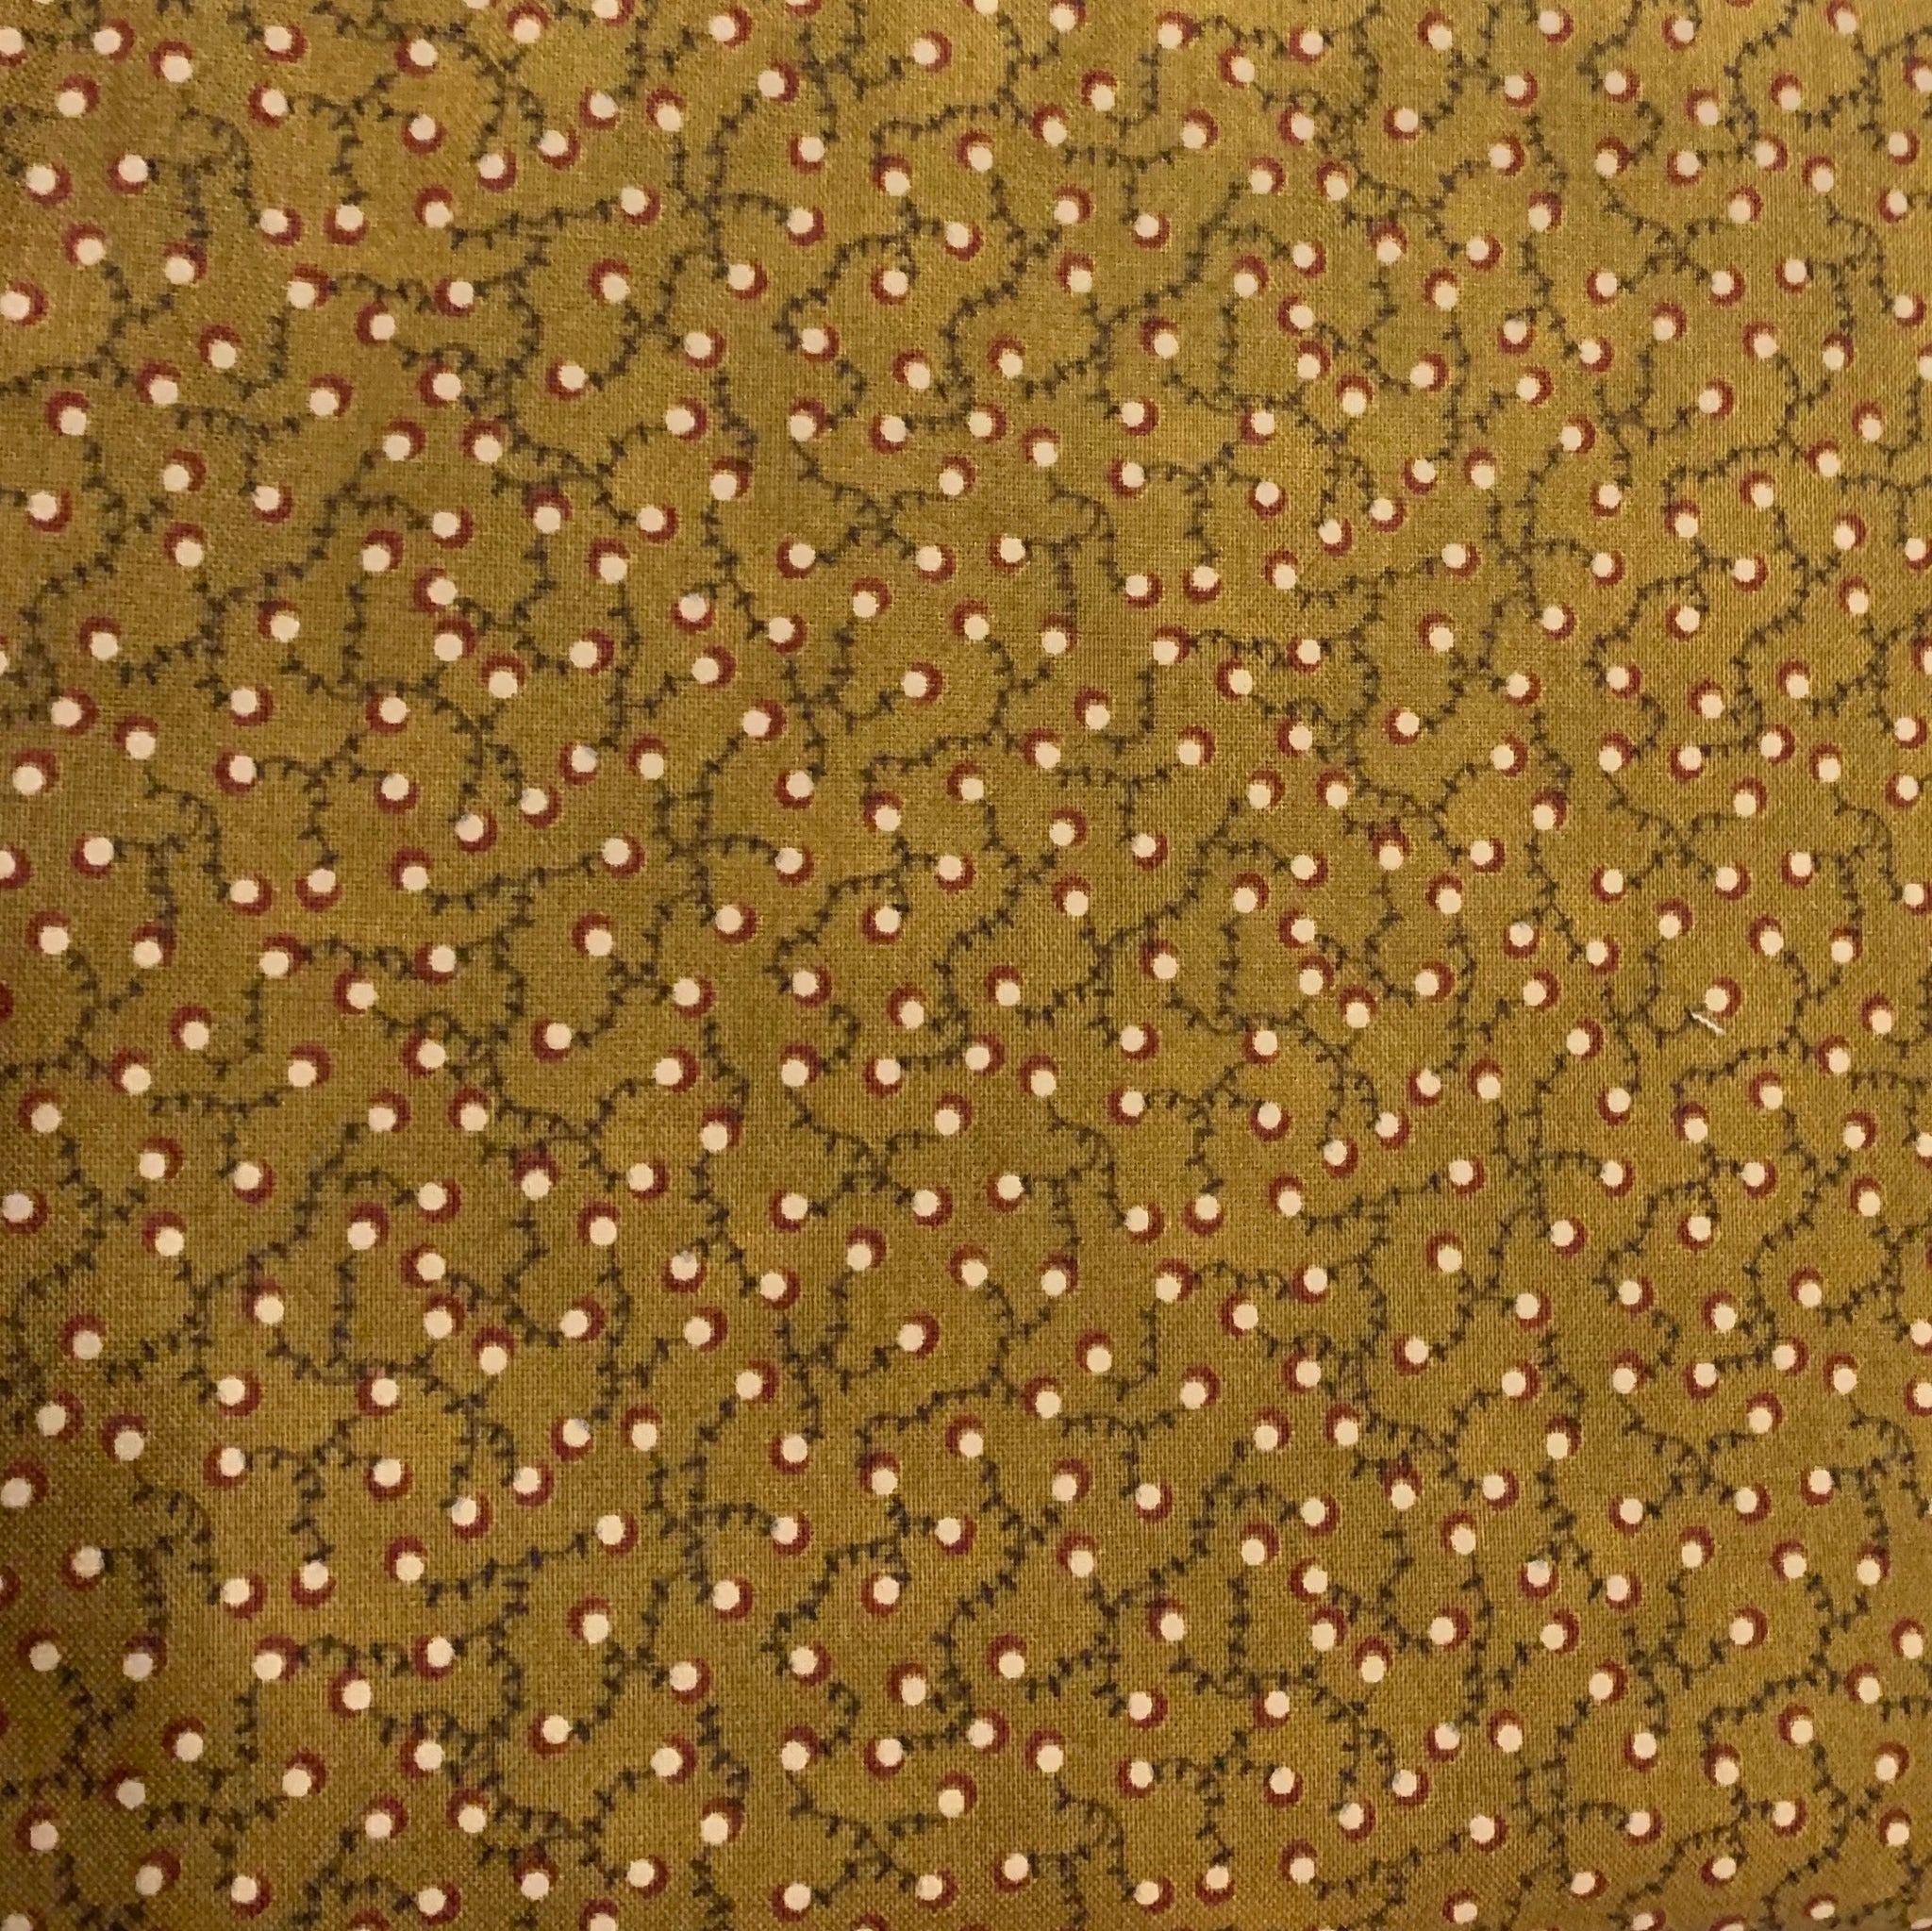 Stof Katie’s Cupboard Brown with Cream dot pattern fabric 4703 587 - 1 1/2 mtrs x 45"